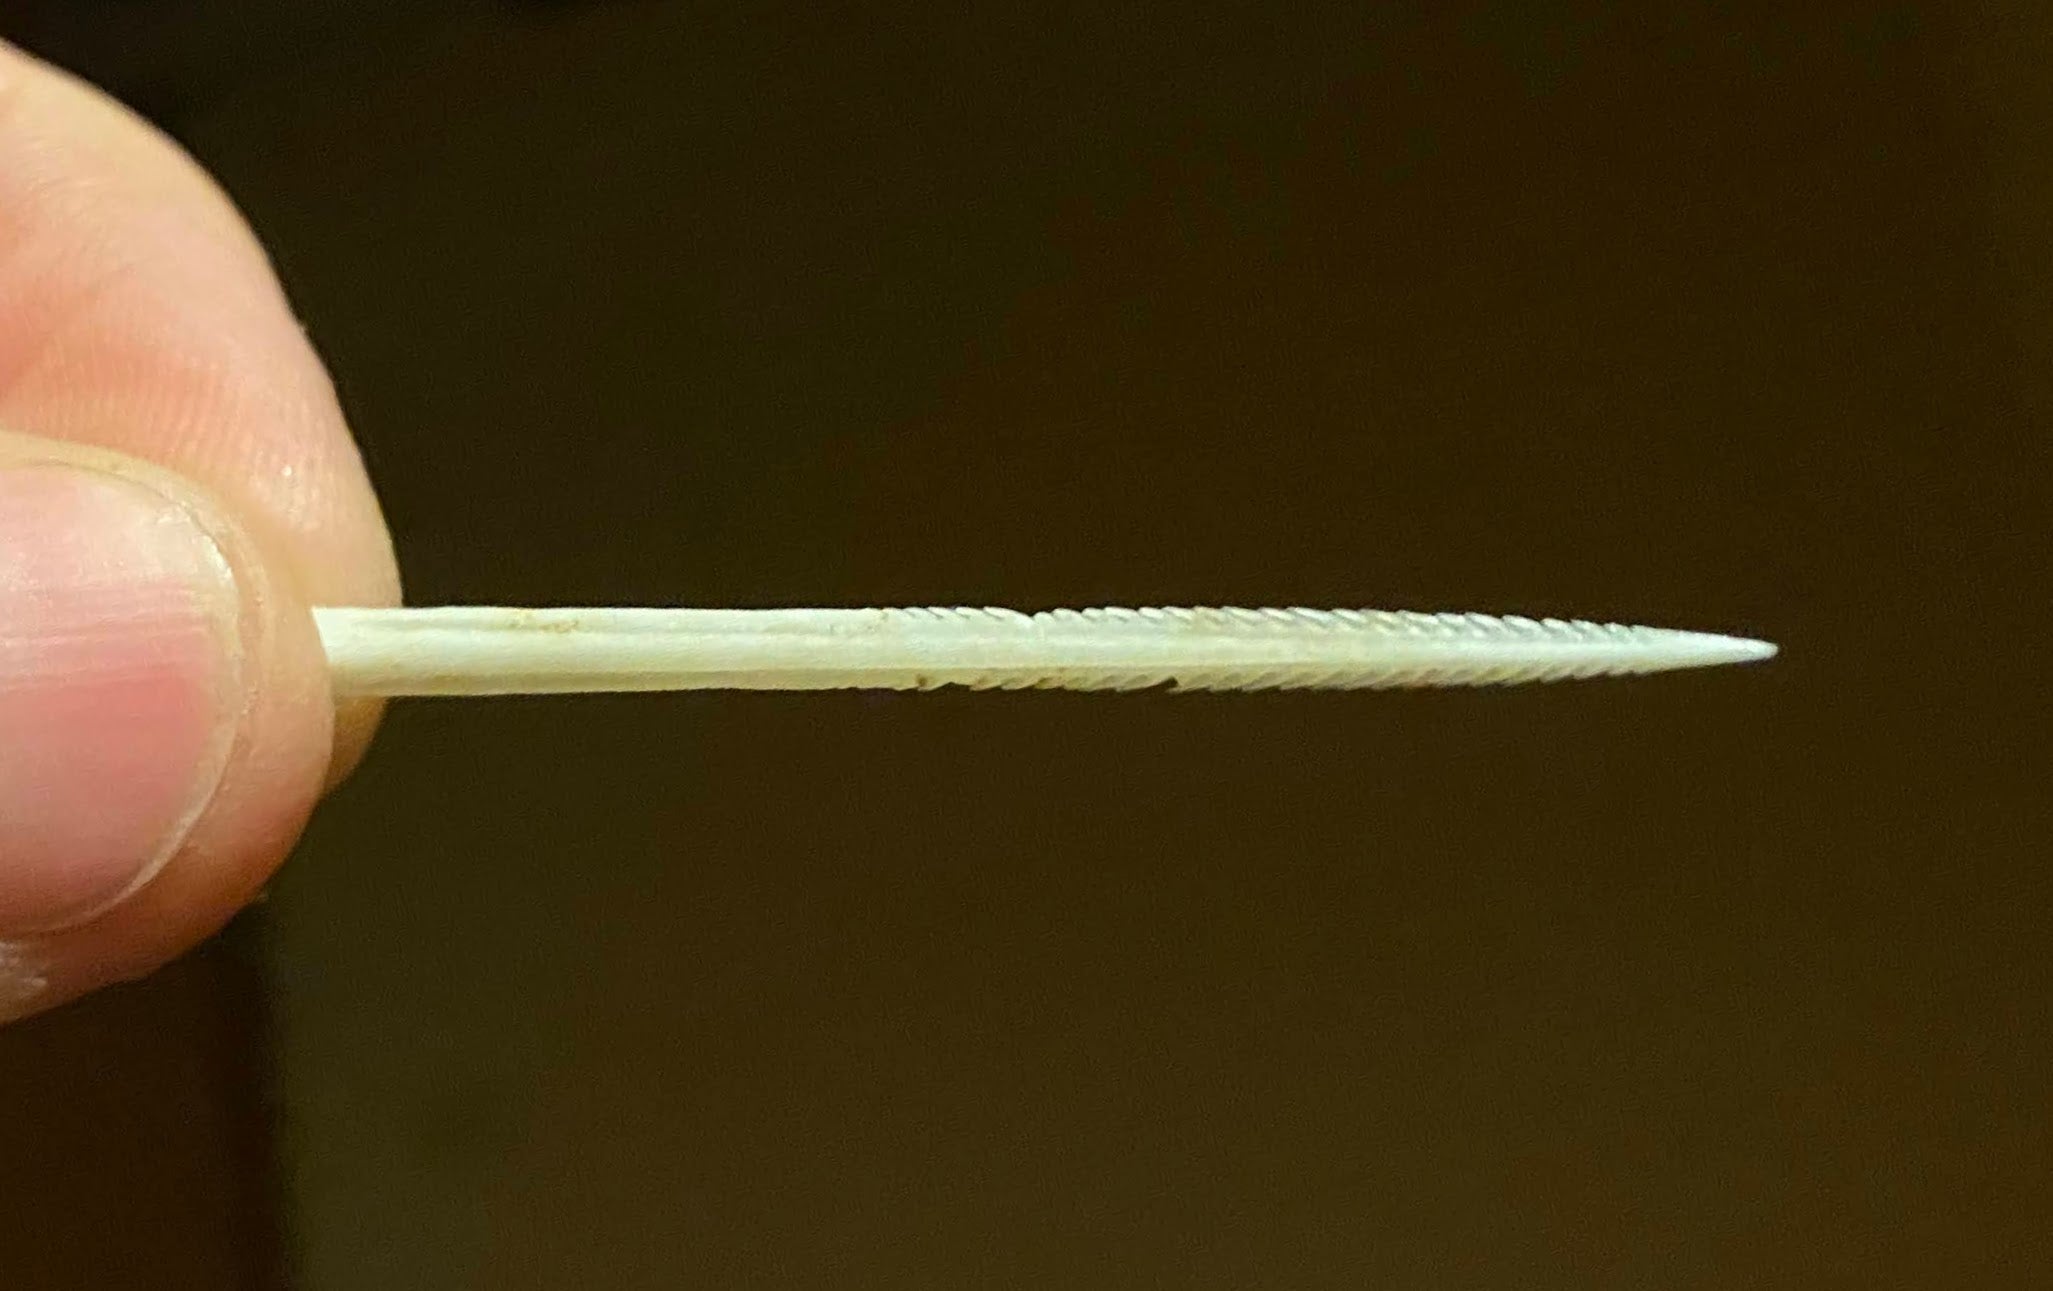 A stingray barb showing the serrates spines